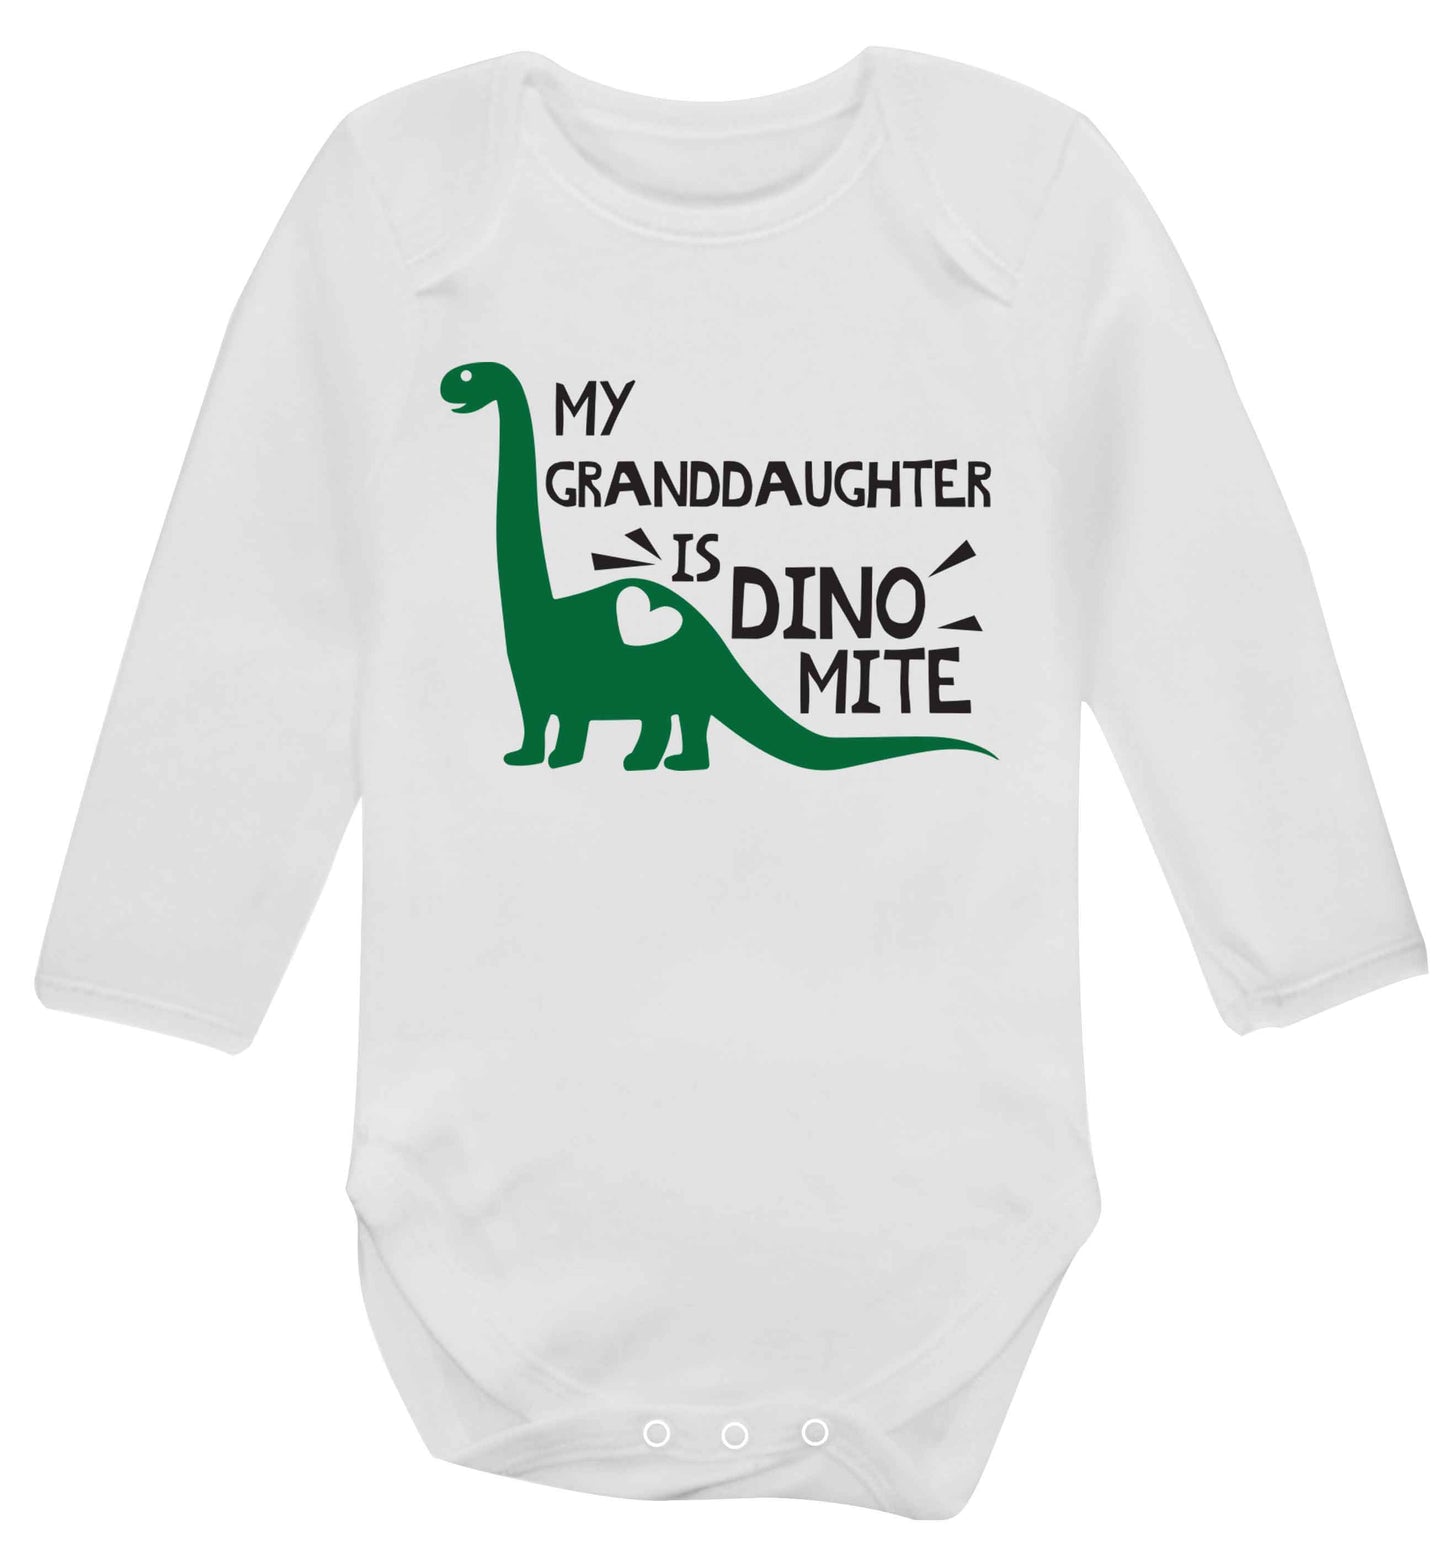 My granddaughter is dinomite! Baby Vest long sleeved white 6-12 months